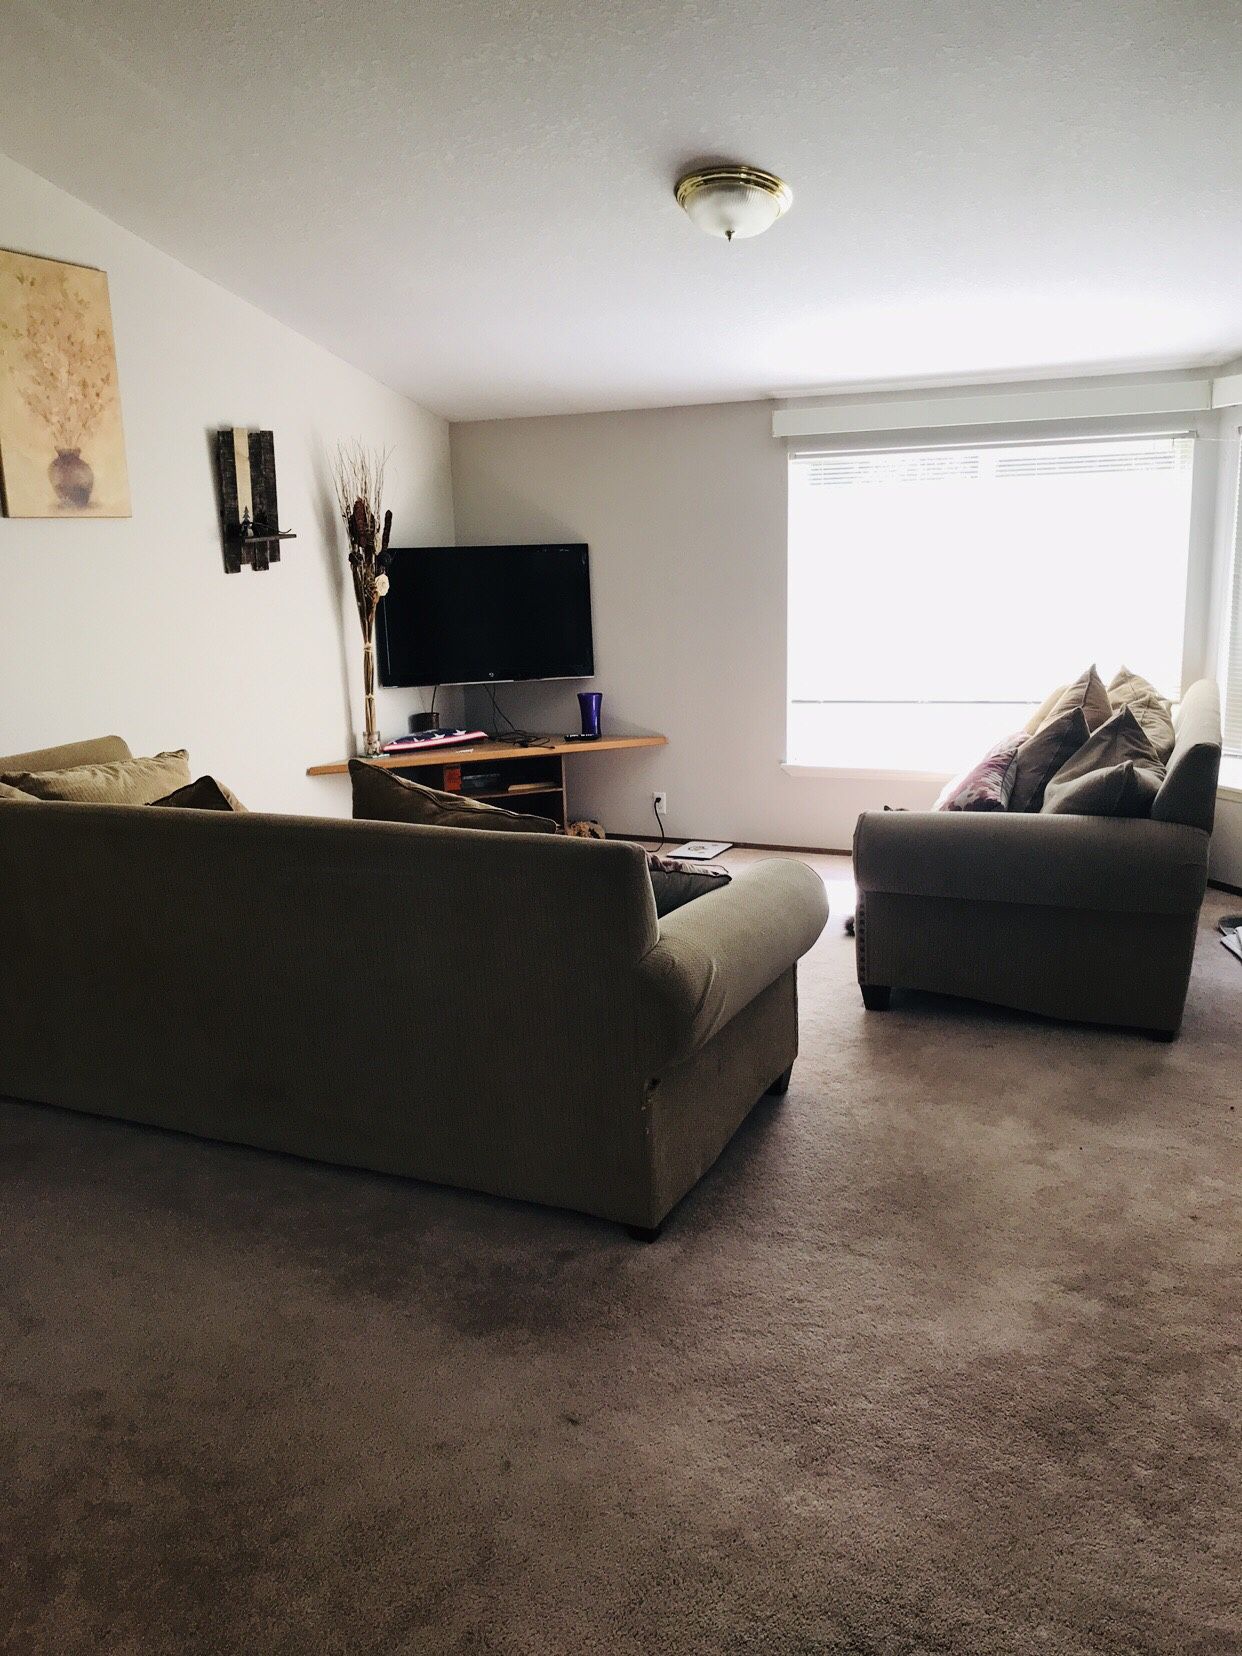 Large beige sectional couch